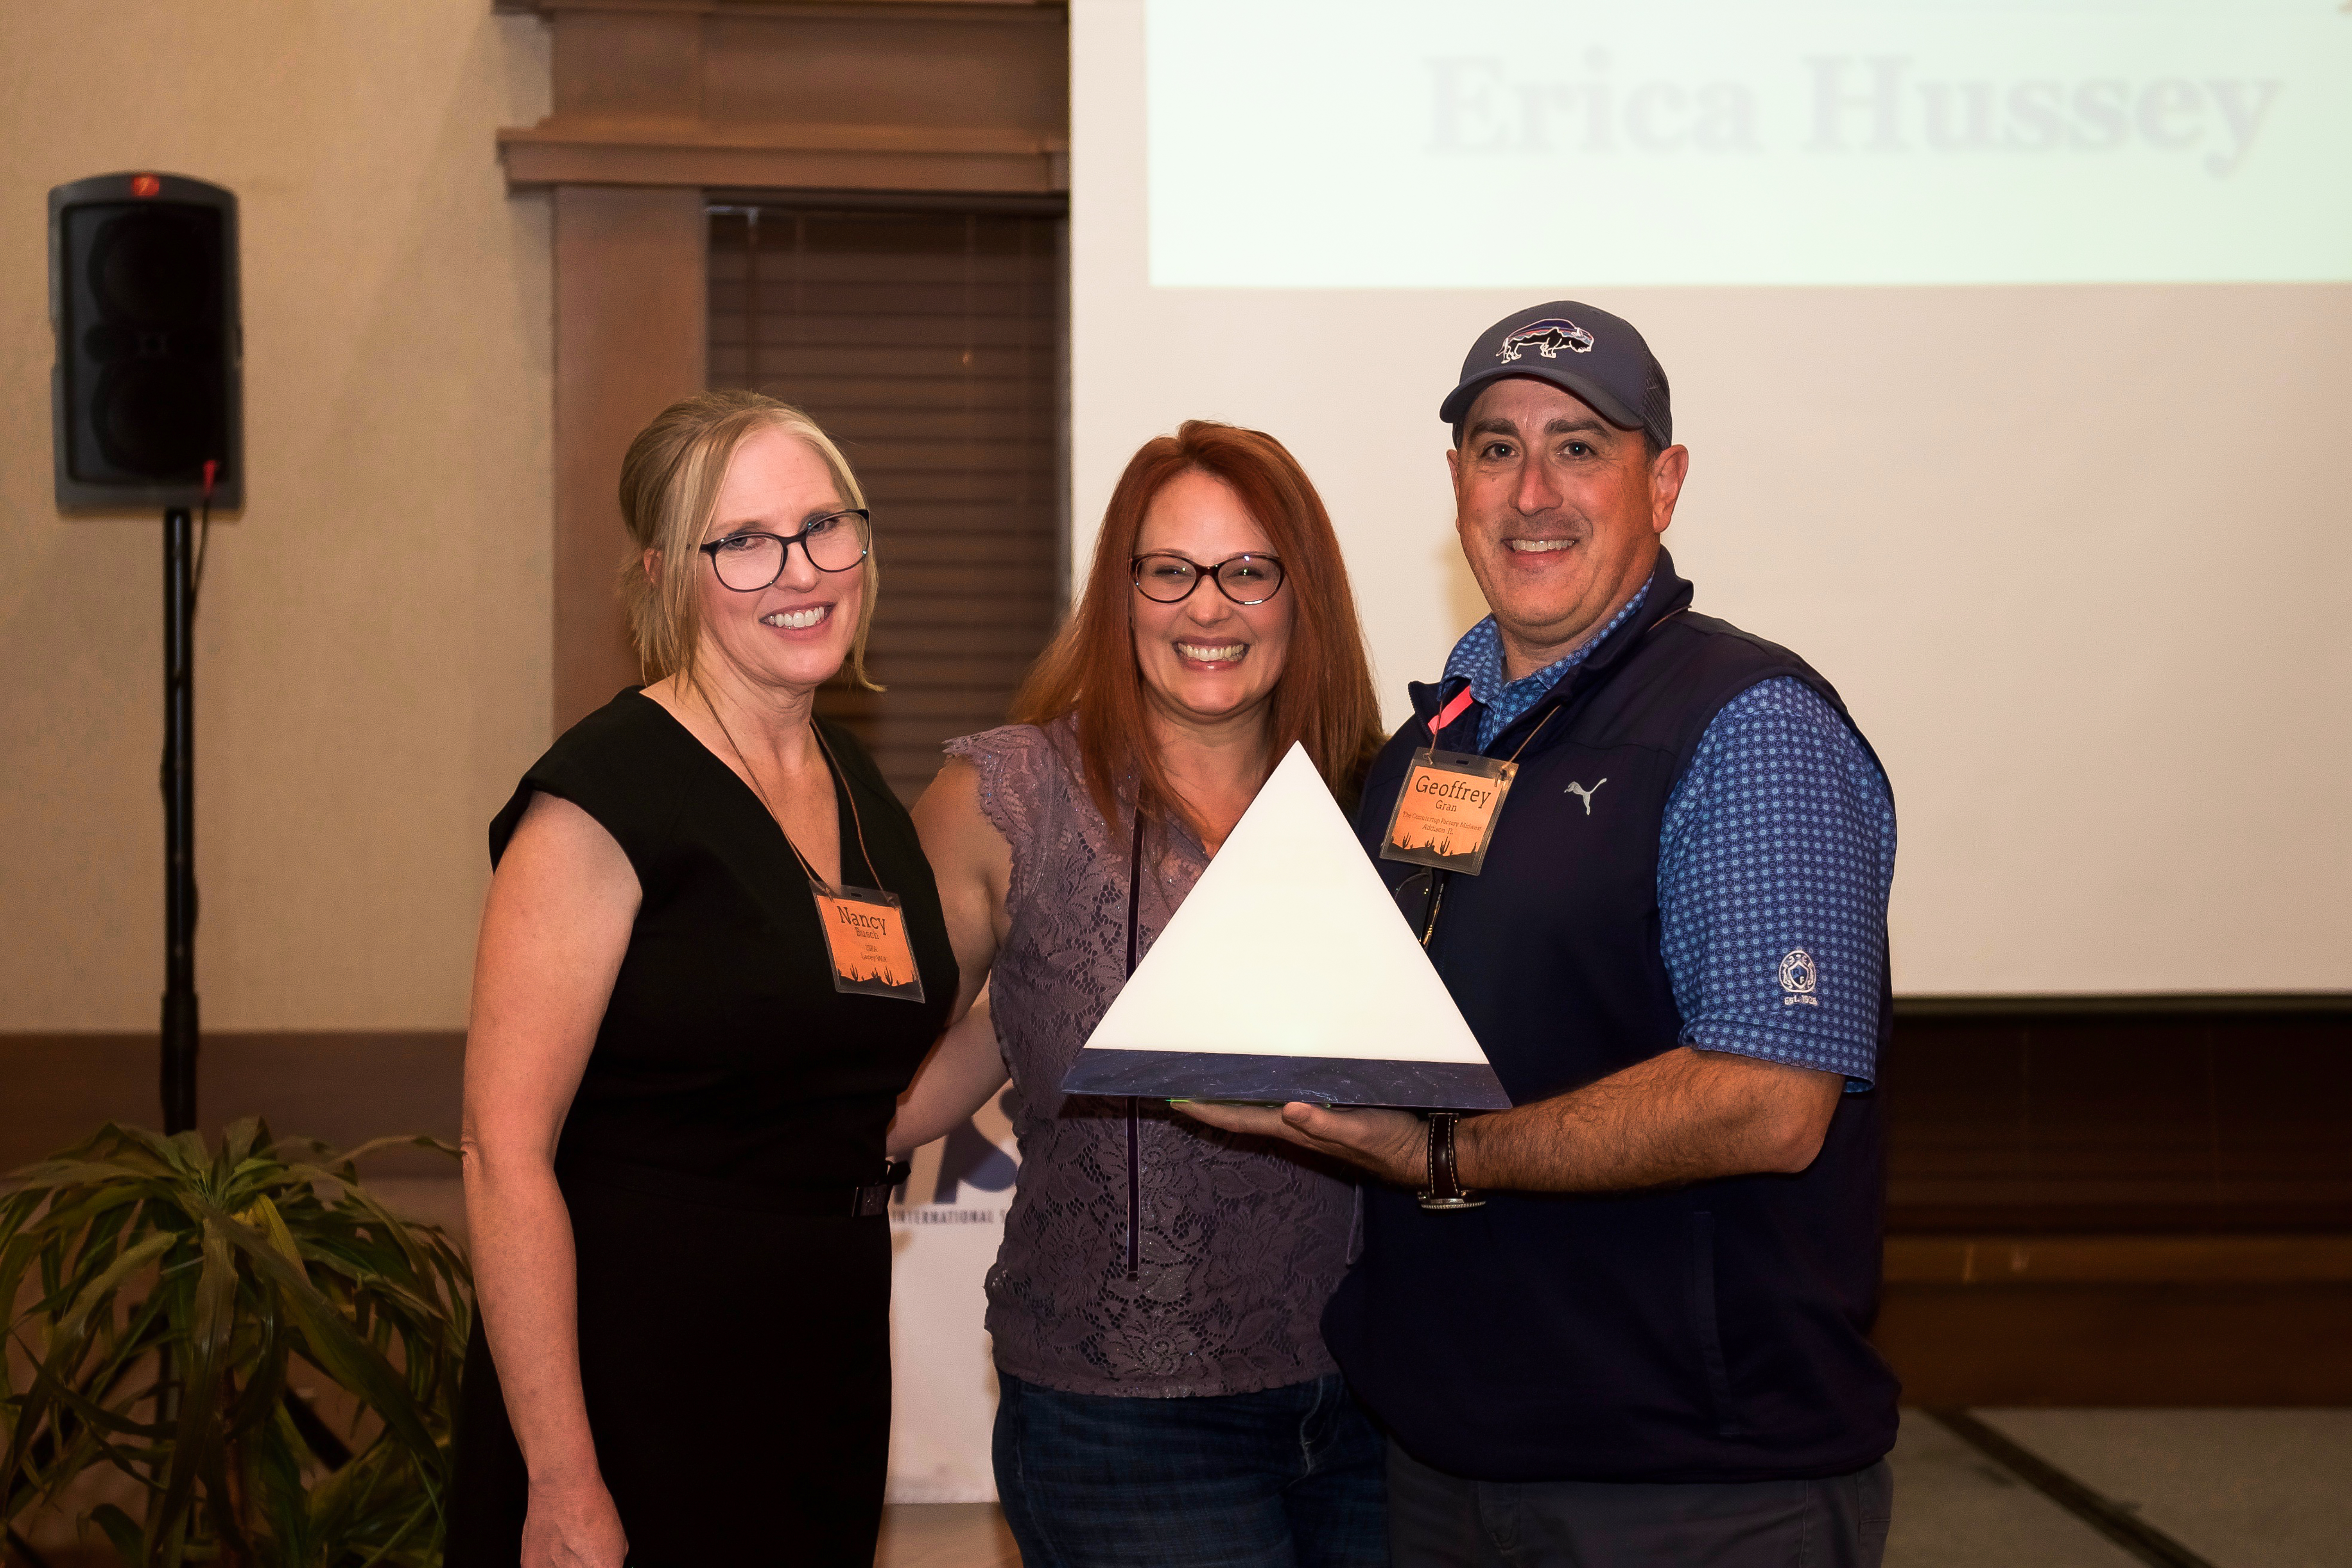 ISFA Executive Director Nancy Busch and former Fabricator of the Year Geoffrey Gran present the 2021 Fabricator of the Year Award to Erica Hussey of JCW Countertops.